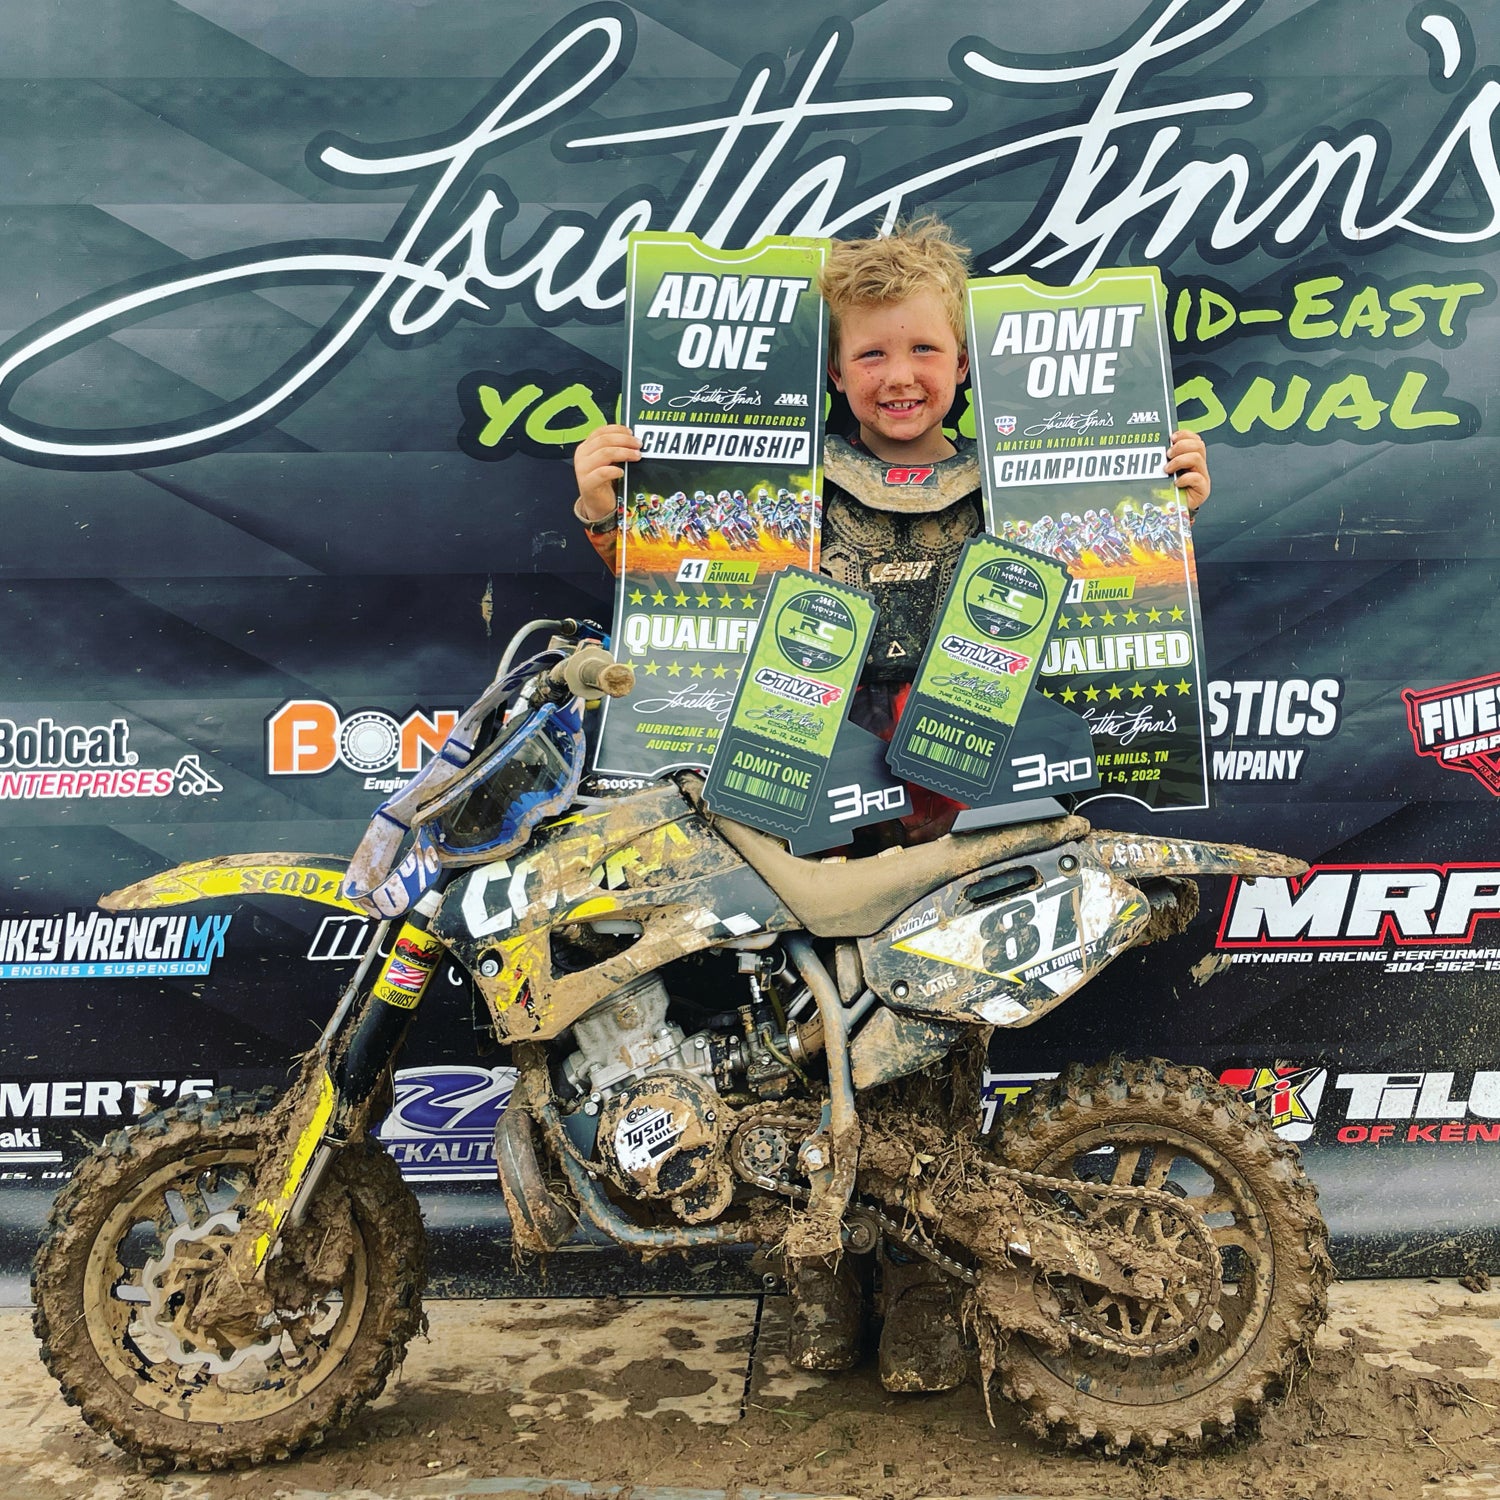 Norwood 7-year-old to compete in motocross championship at Loretta Lynns Ranch